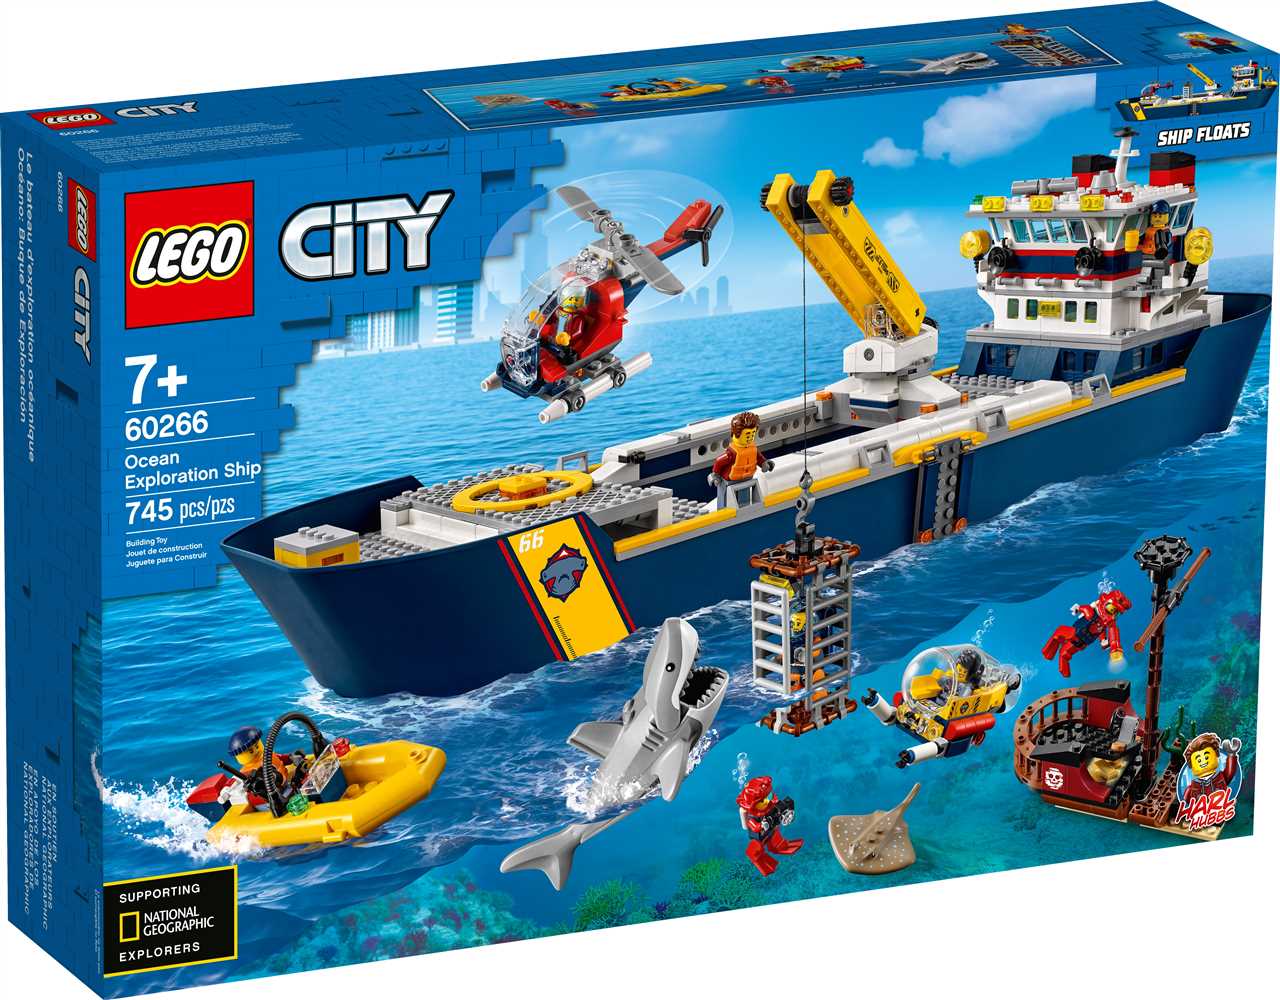 Unleash Your Creativity with Lego City Sets